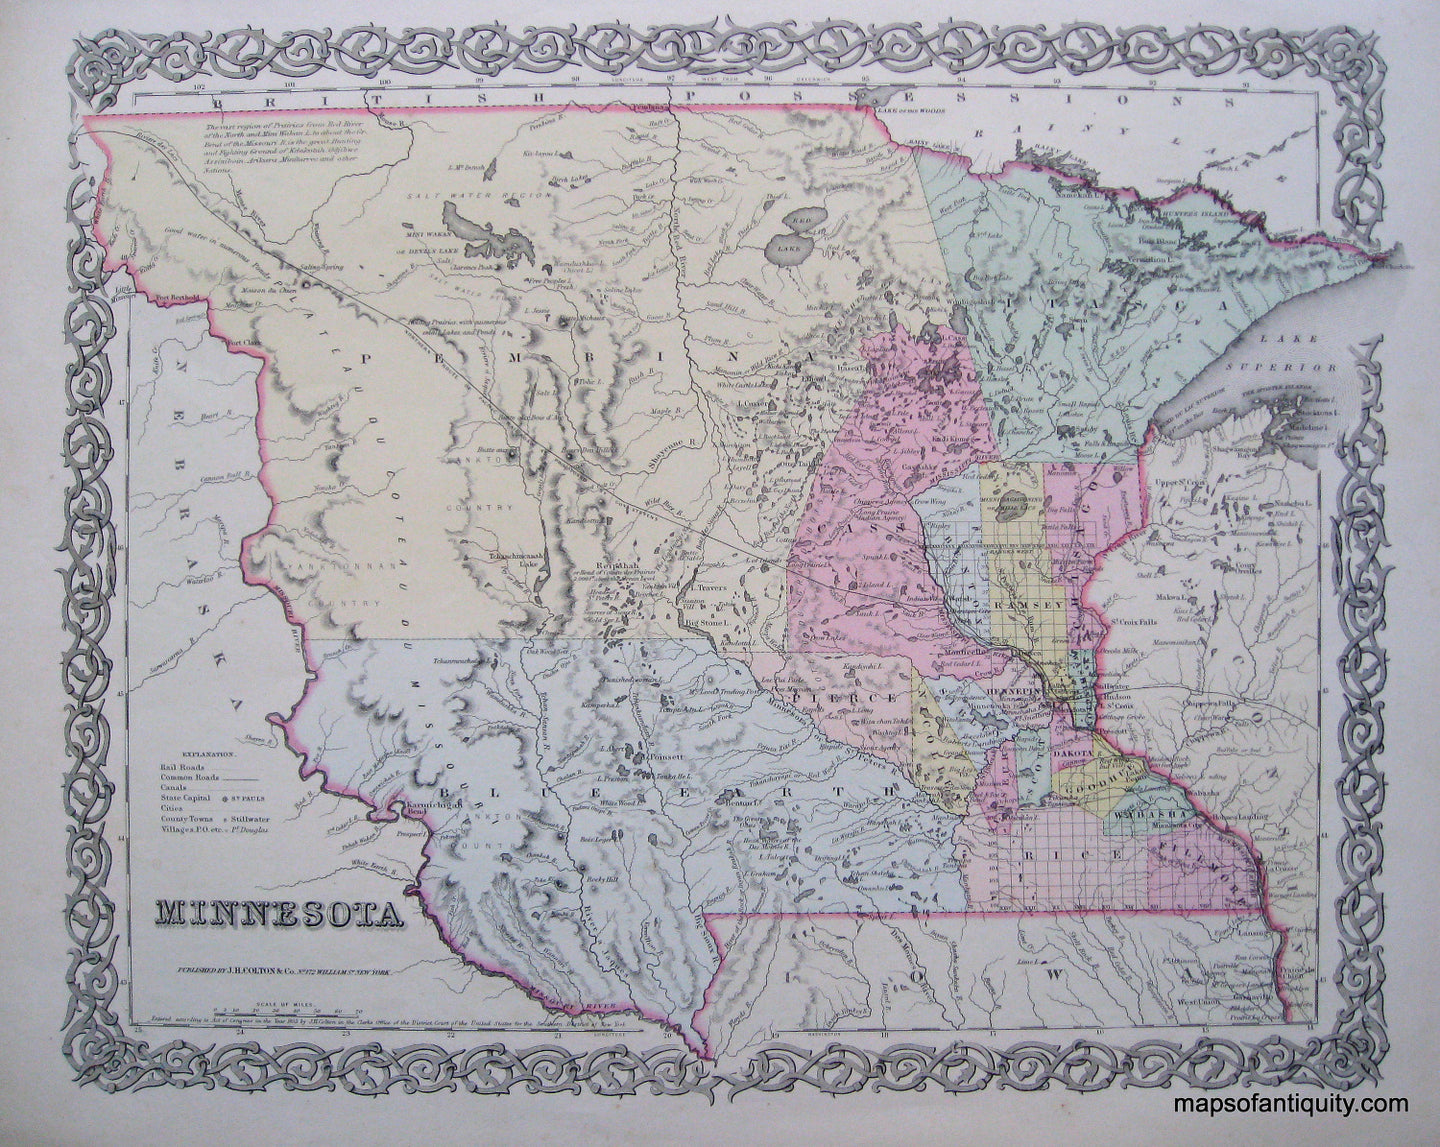 Antique-Hand-Colored-Map-Minnesota-**********-Minnesota-Midwest-1855-Colton-Maps-Of-Antiquity